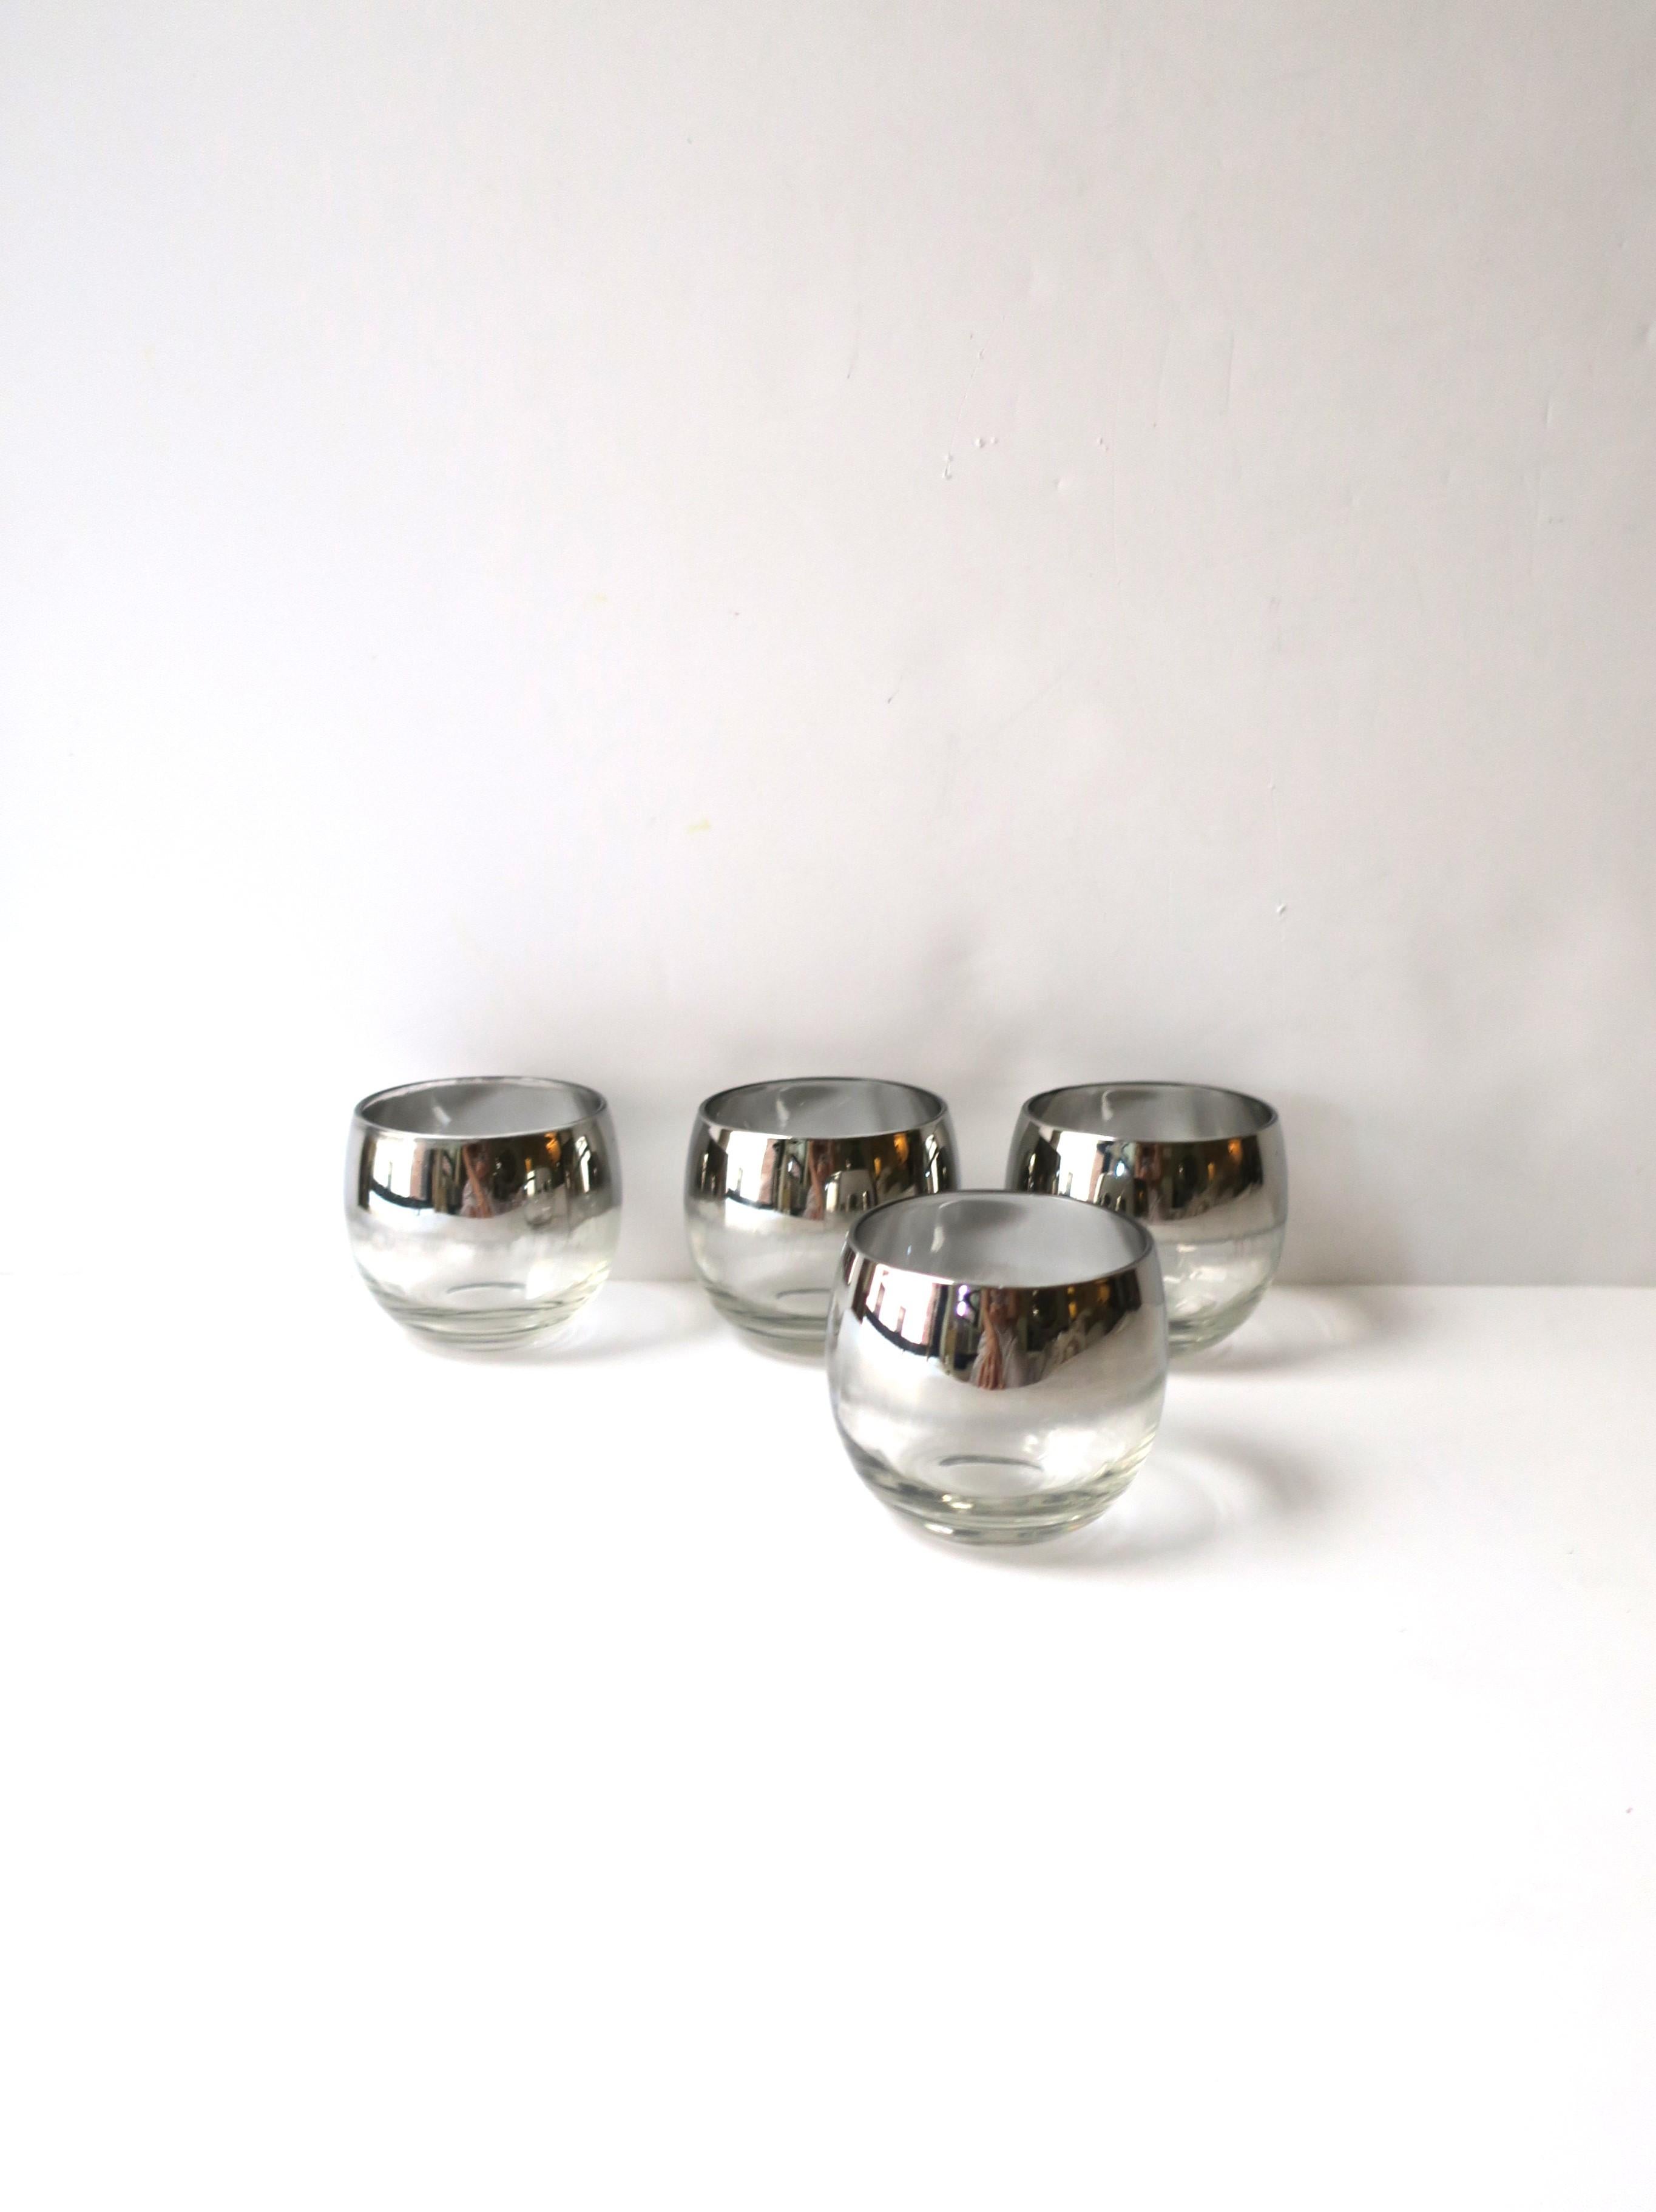 A set of four (4) silver rimmed roly-poly cocktail glasses in style of American designer Dorothy Thorpe, Mid-Century Modern period, circa mid-20th century, USA. Set has a silver/mirrored rim. A great set for cocktails, entertaining, bar, bar cart,